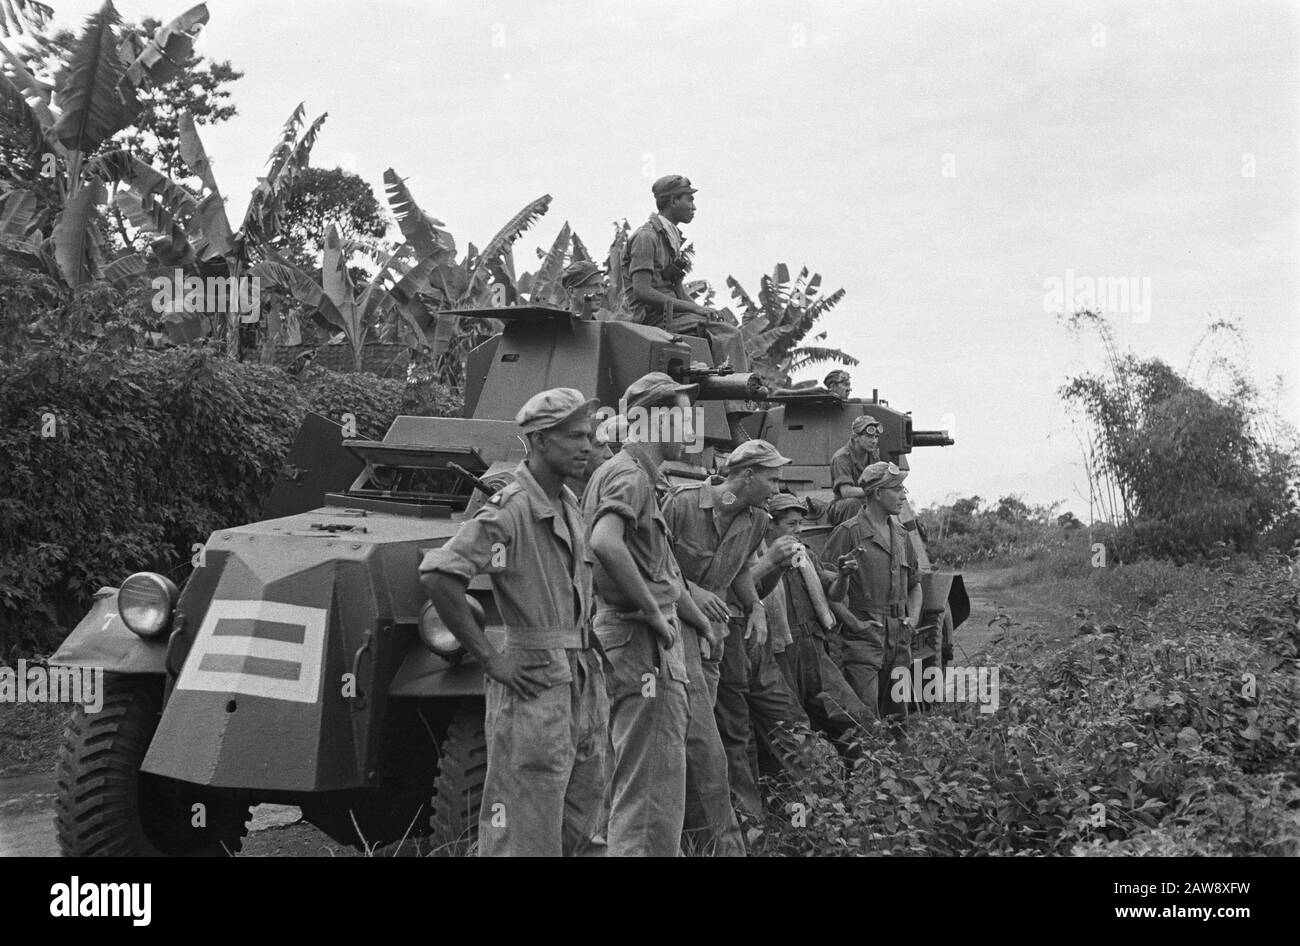 Veterans on the road  [Armored Car Platoon KNIL] Look, you can see that going around Bandung. Corporal H. Smidt from Suriname, Jan Meyer from Nijmegen, Lieutenant Crince le Roy from Deventer, J. Haumabu from Ambon, JF Mattheyser The Hague, Private First Class of Soldt from The Hague with an armored vehicle at a high tjot Annotation: Marmon-Herrington Armored Vehicles Date: July 1947 Location: Indonesia, Dutch East Indies, Sumatra Stock Photo